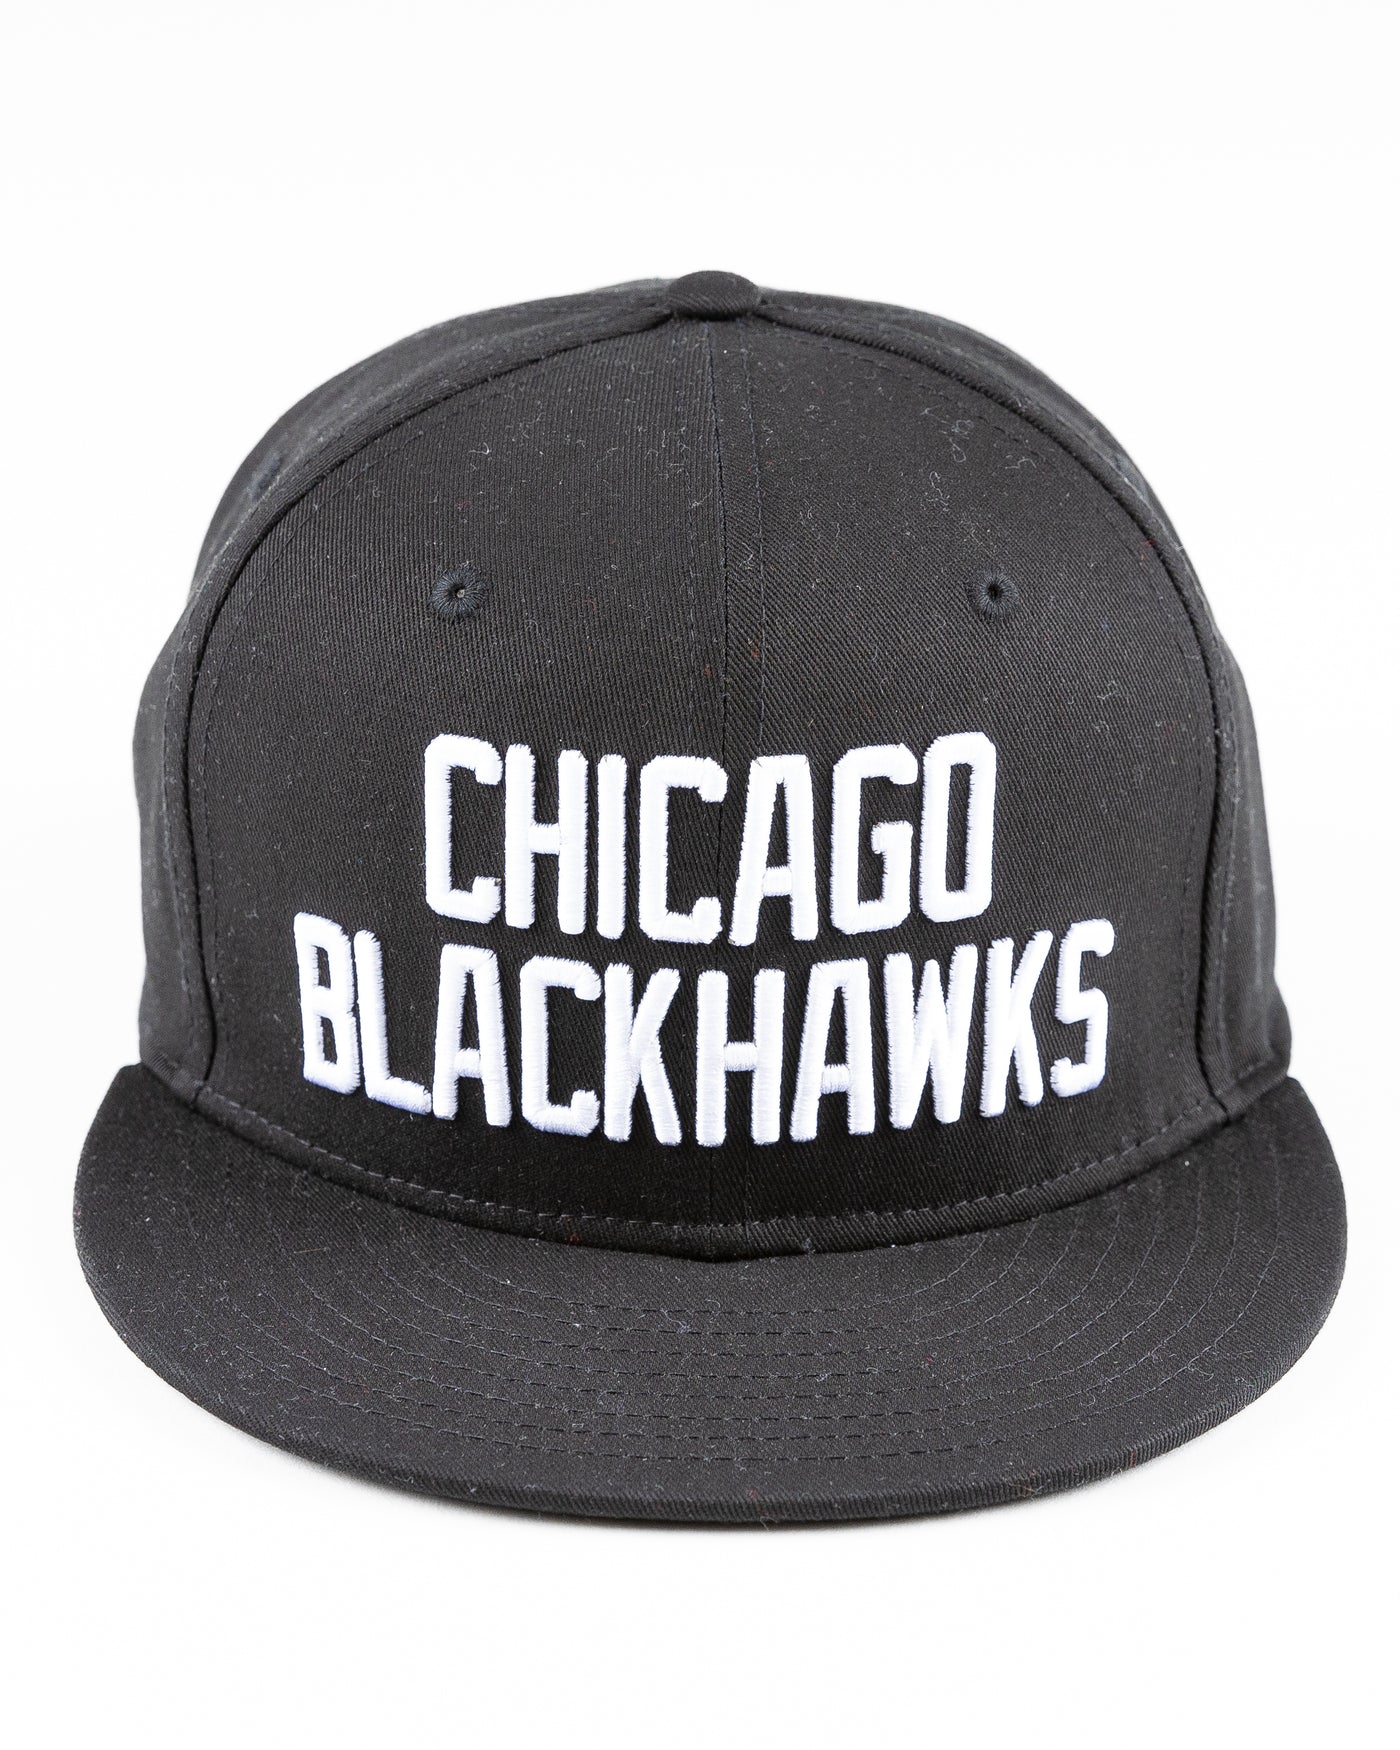 black Starter flat brim snapback with Chicago Blackhawks wordmark embroidered on front - front lay flat